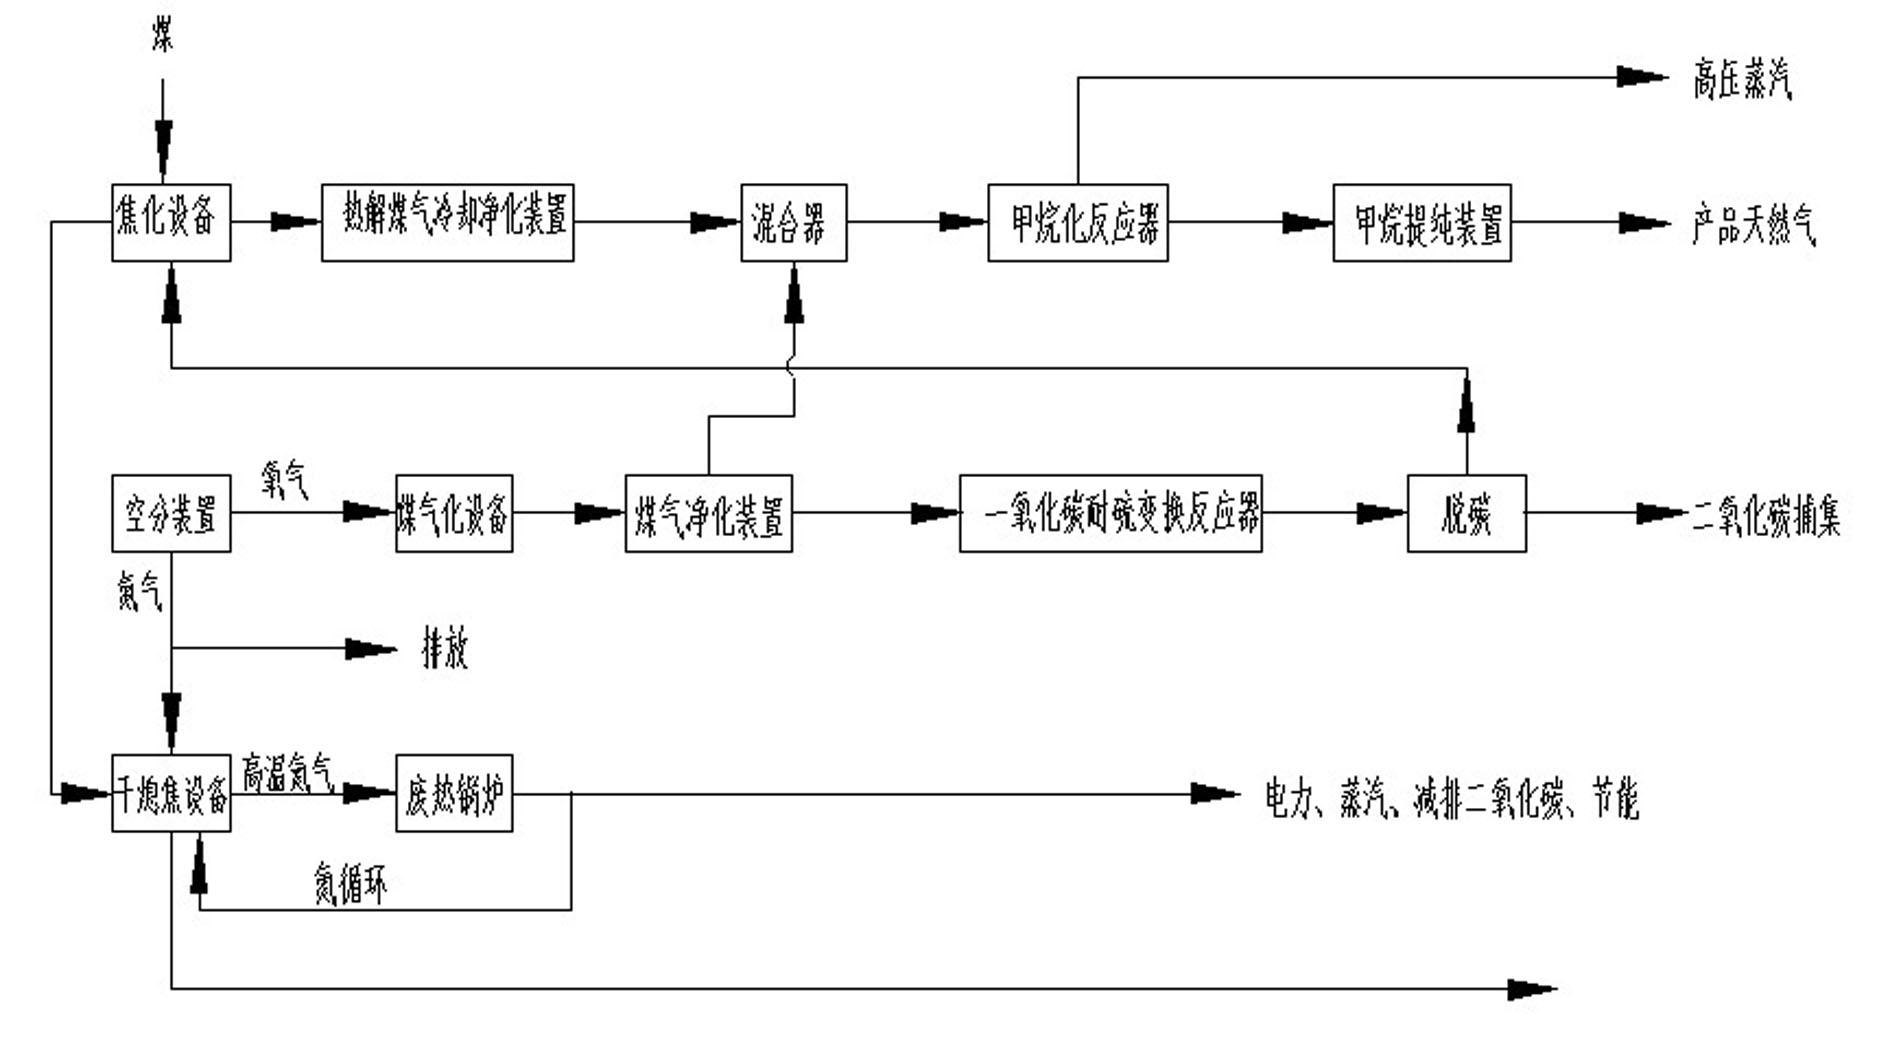 Process for producing natural gas by coal coking and pyrolysis coal gas thereof